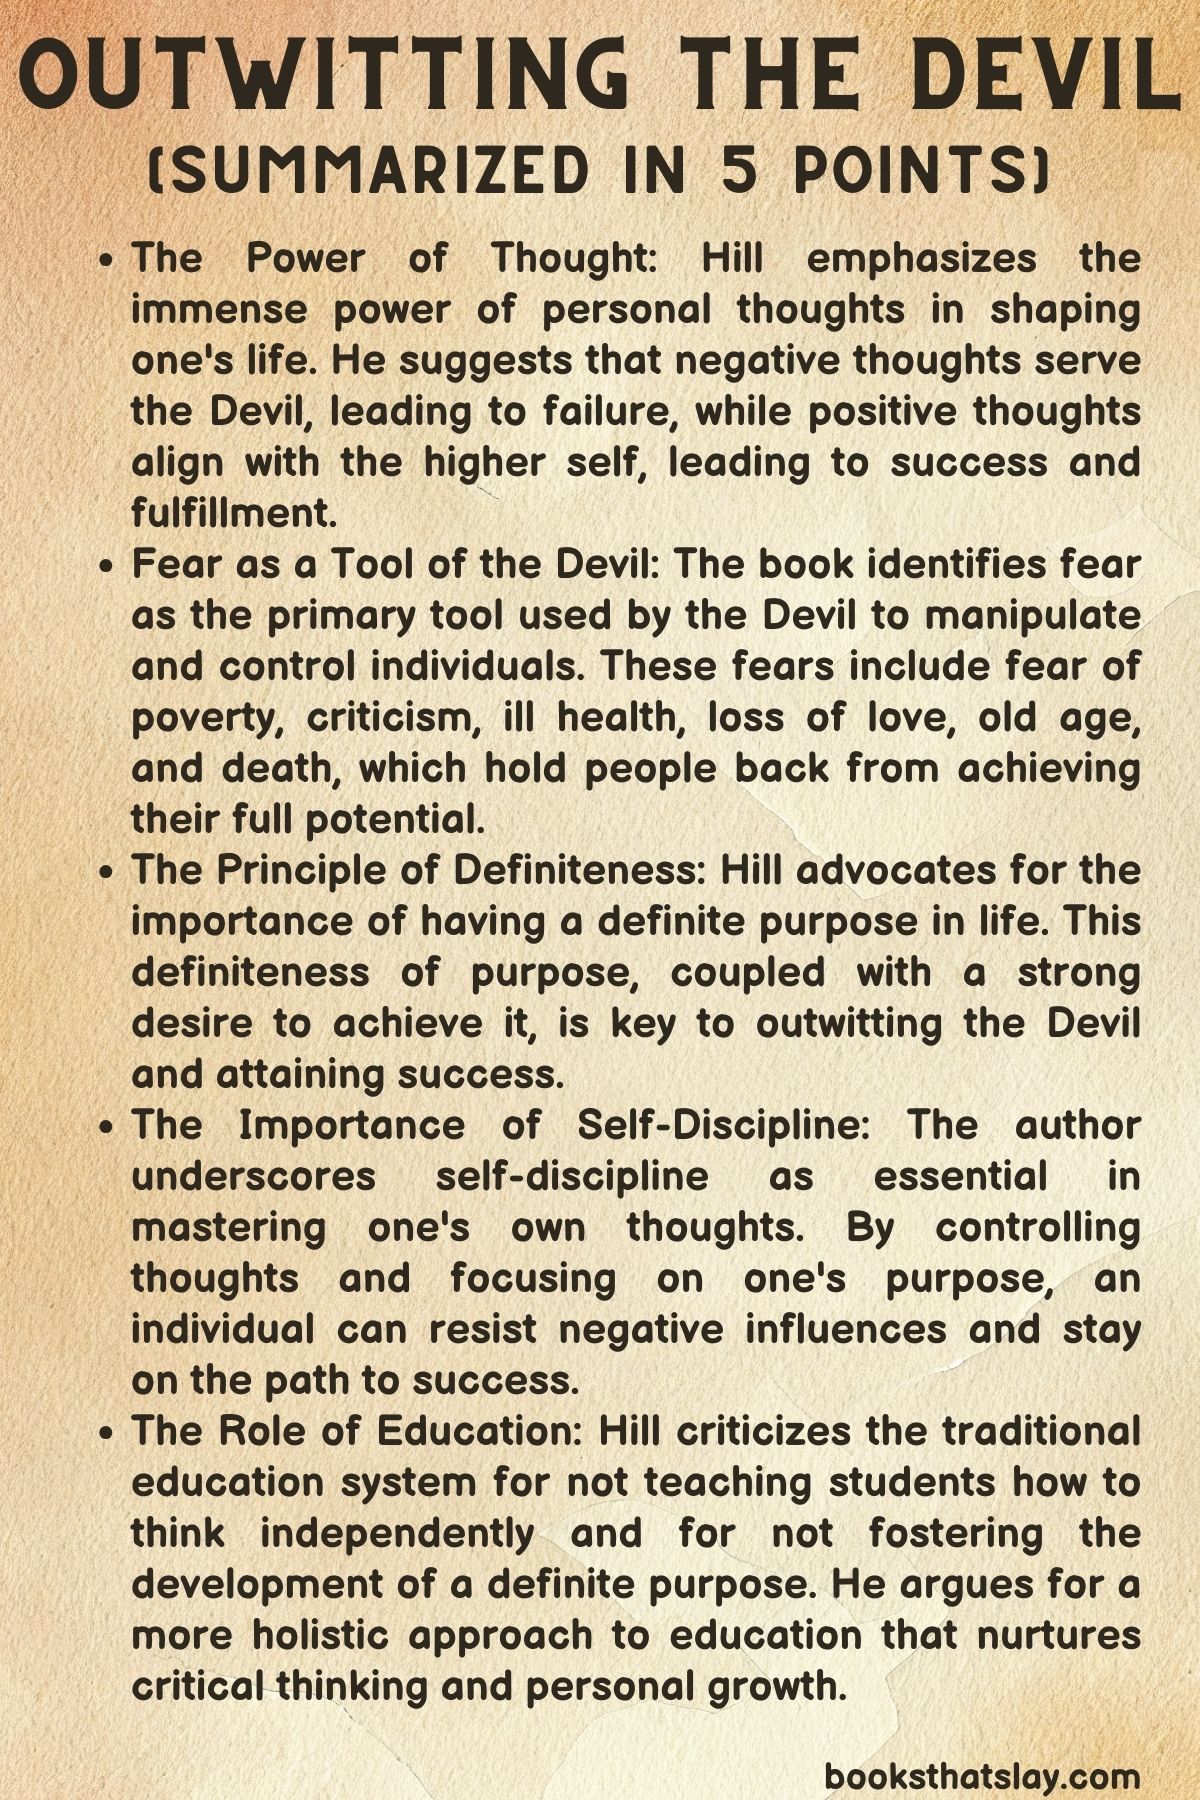 Outwitting the Devil Summary